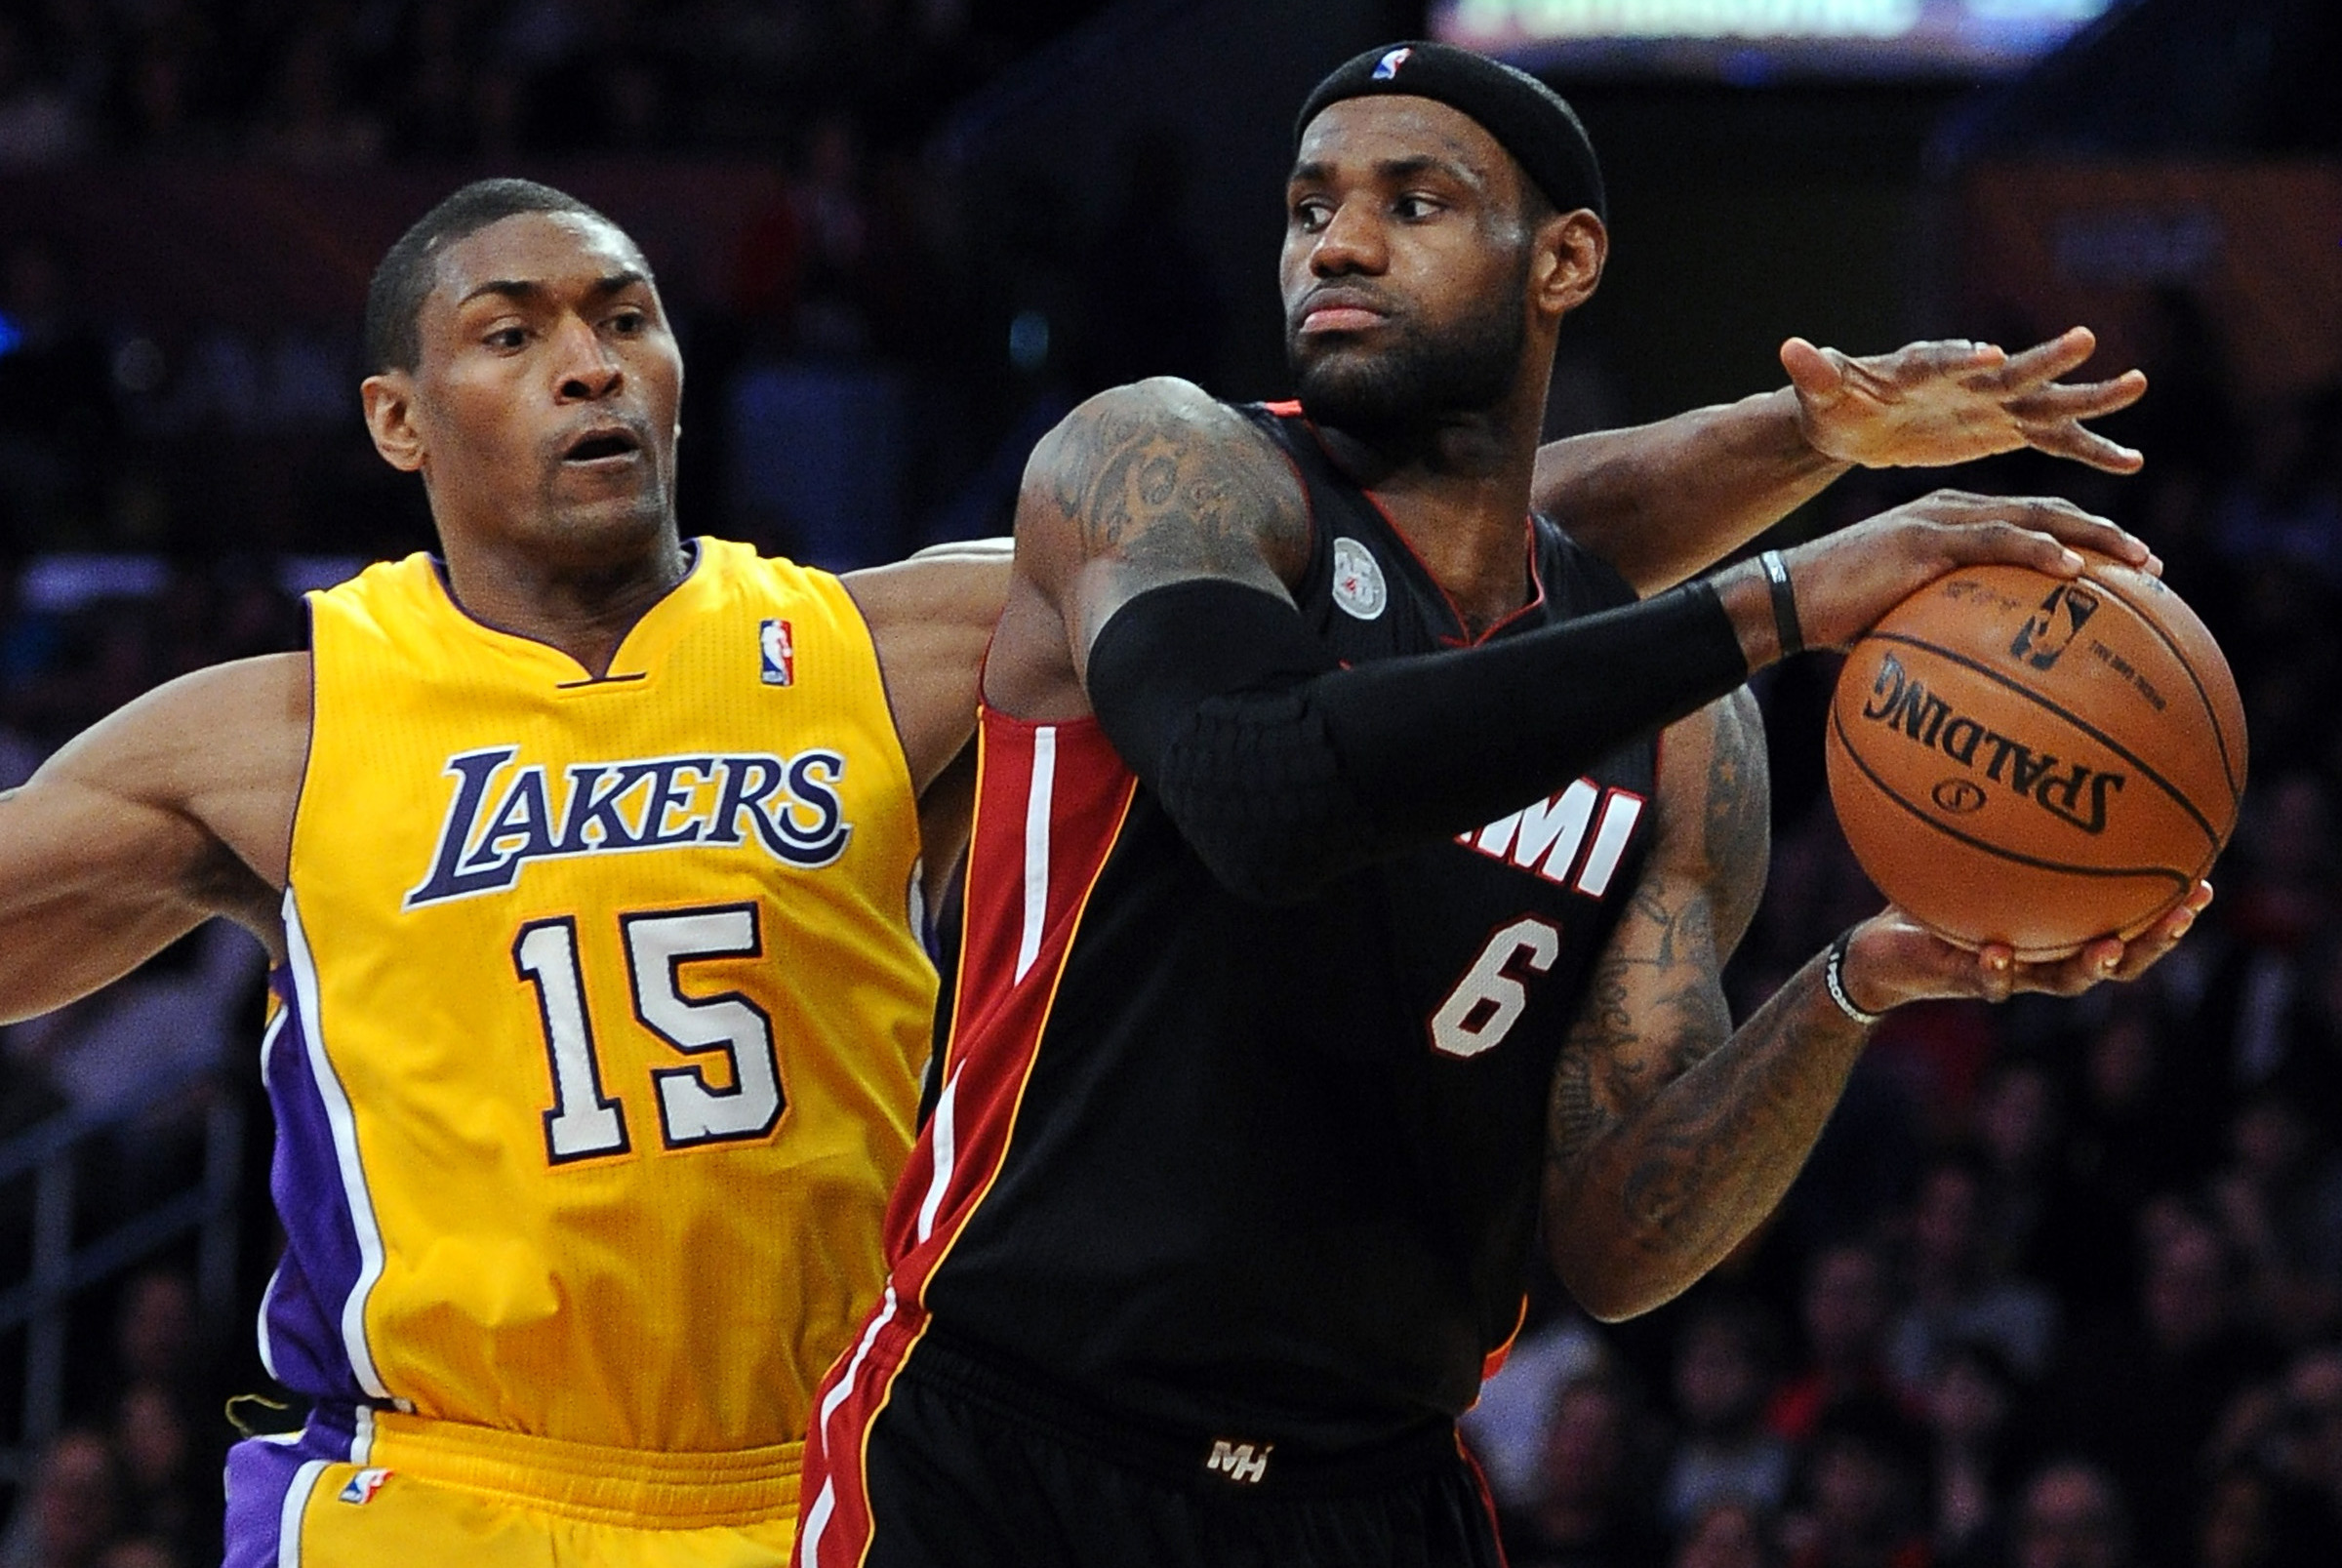 Los Angeles Lakers vs. Miami Heat Live Score, Results and Game